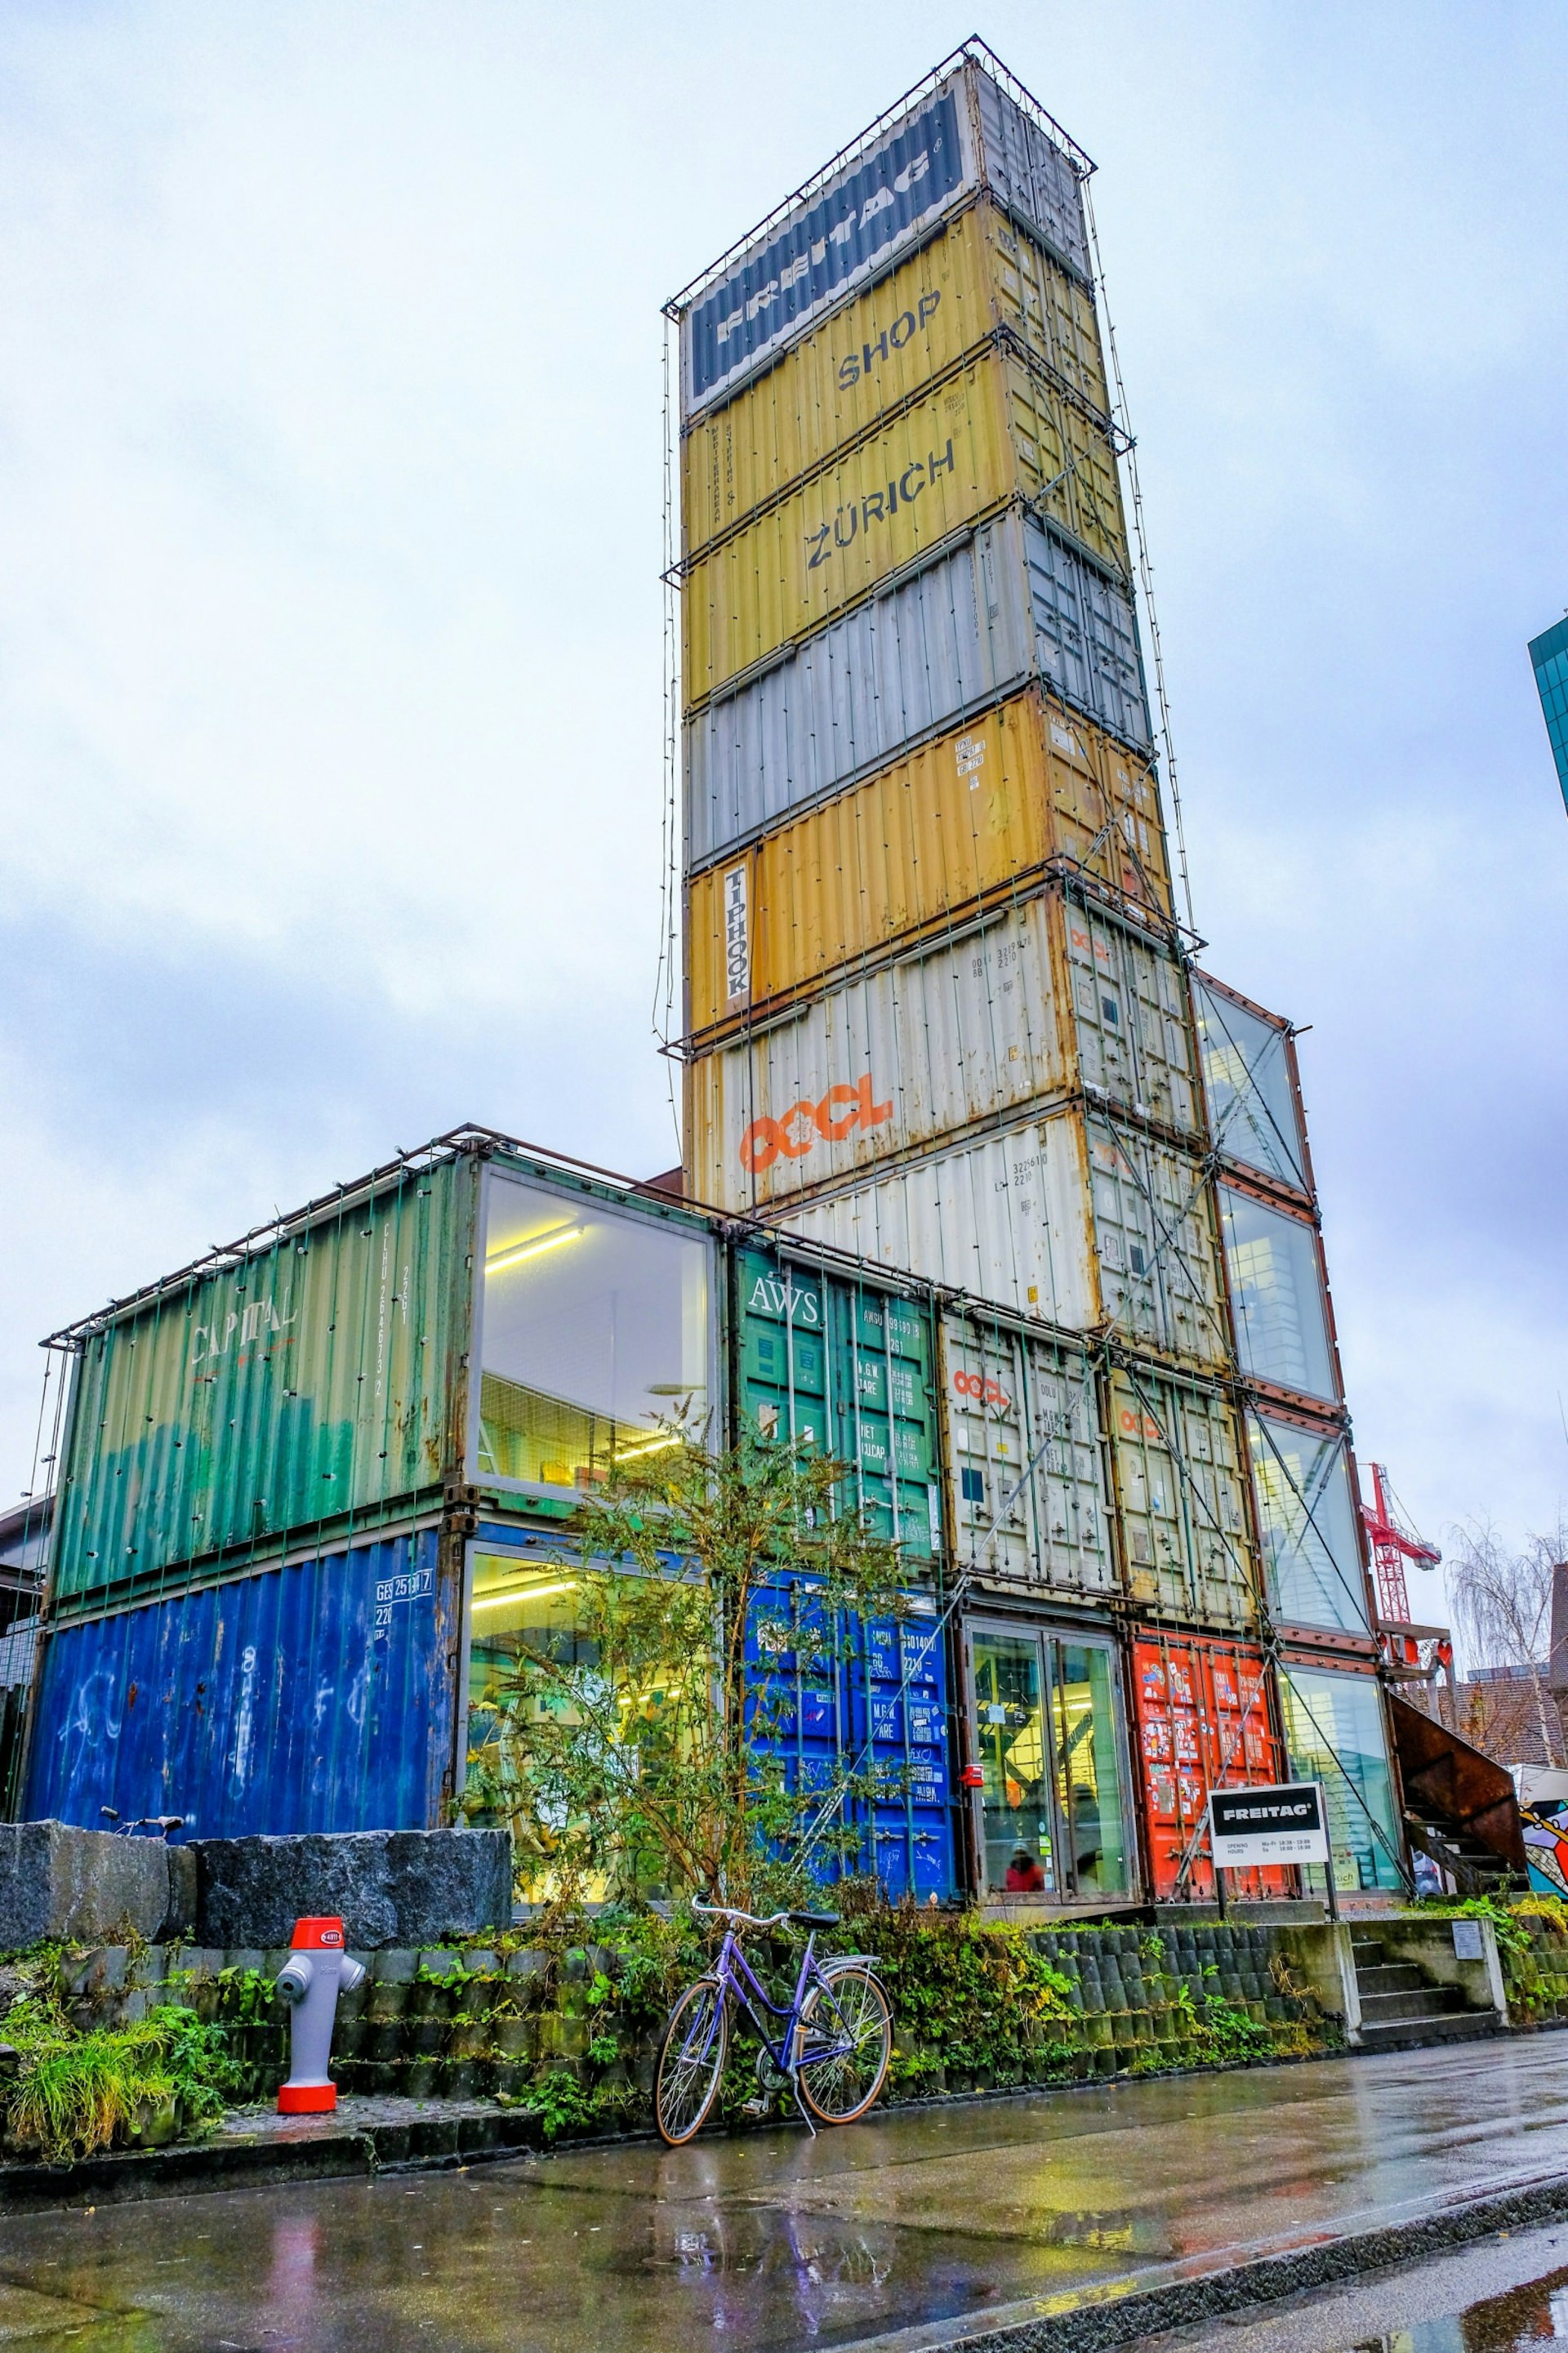 Made entirely of shipping containers, the Frietag shop in Zürich, Switzerland rises up against a grey sky © chayakorn.t / Shutterstock